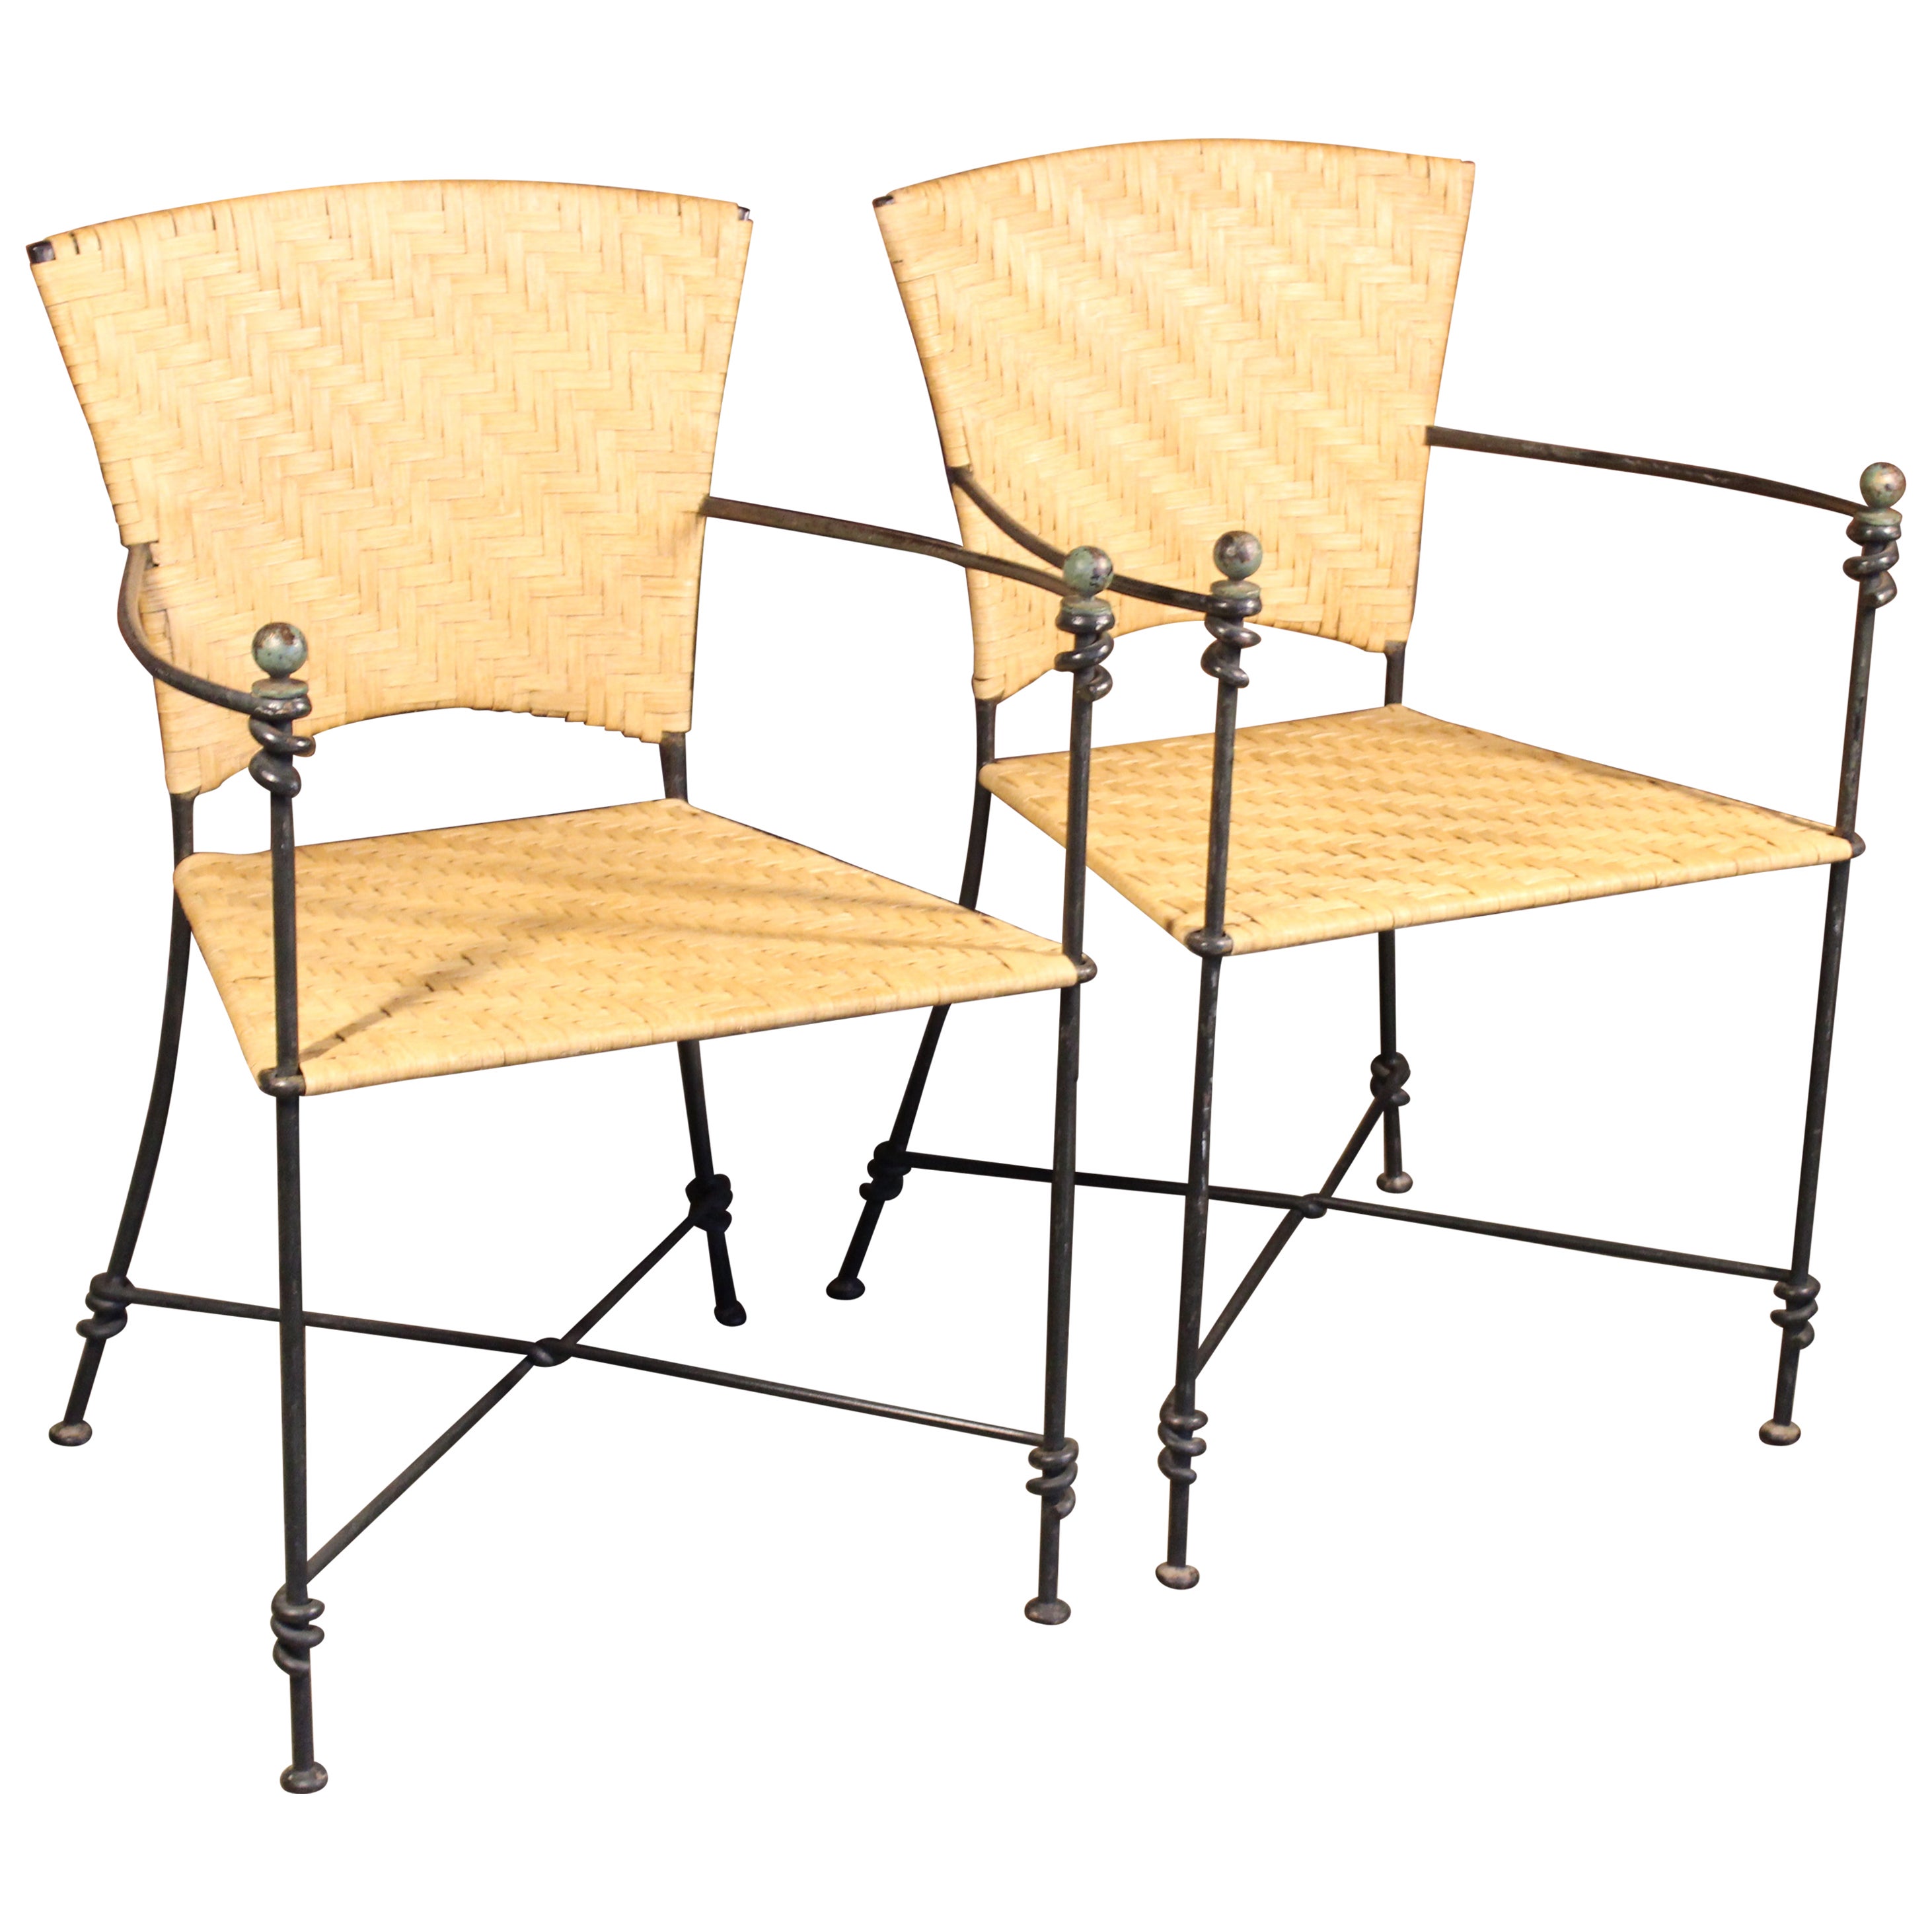 Pair of Iron and Rattan Armchairs, France, 1950s